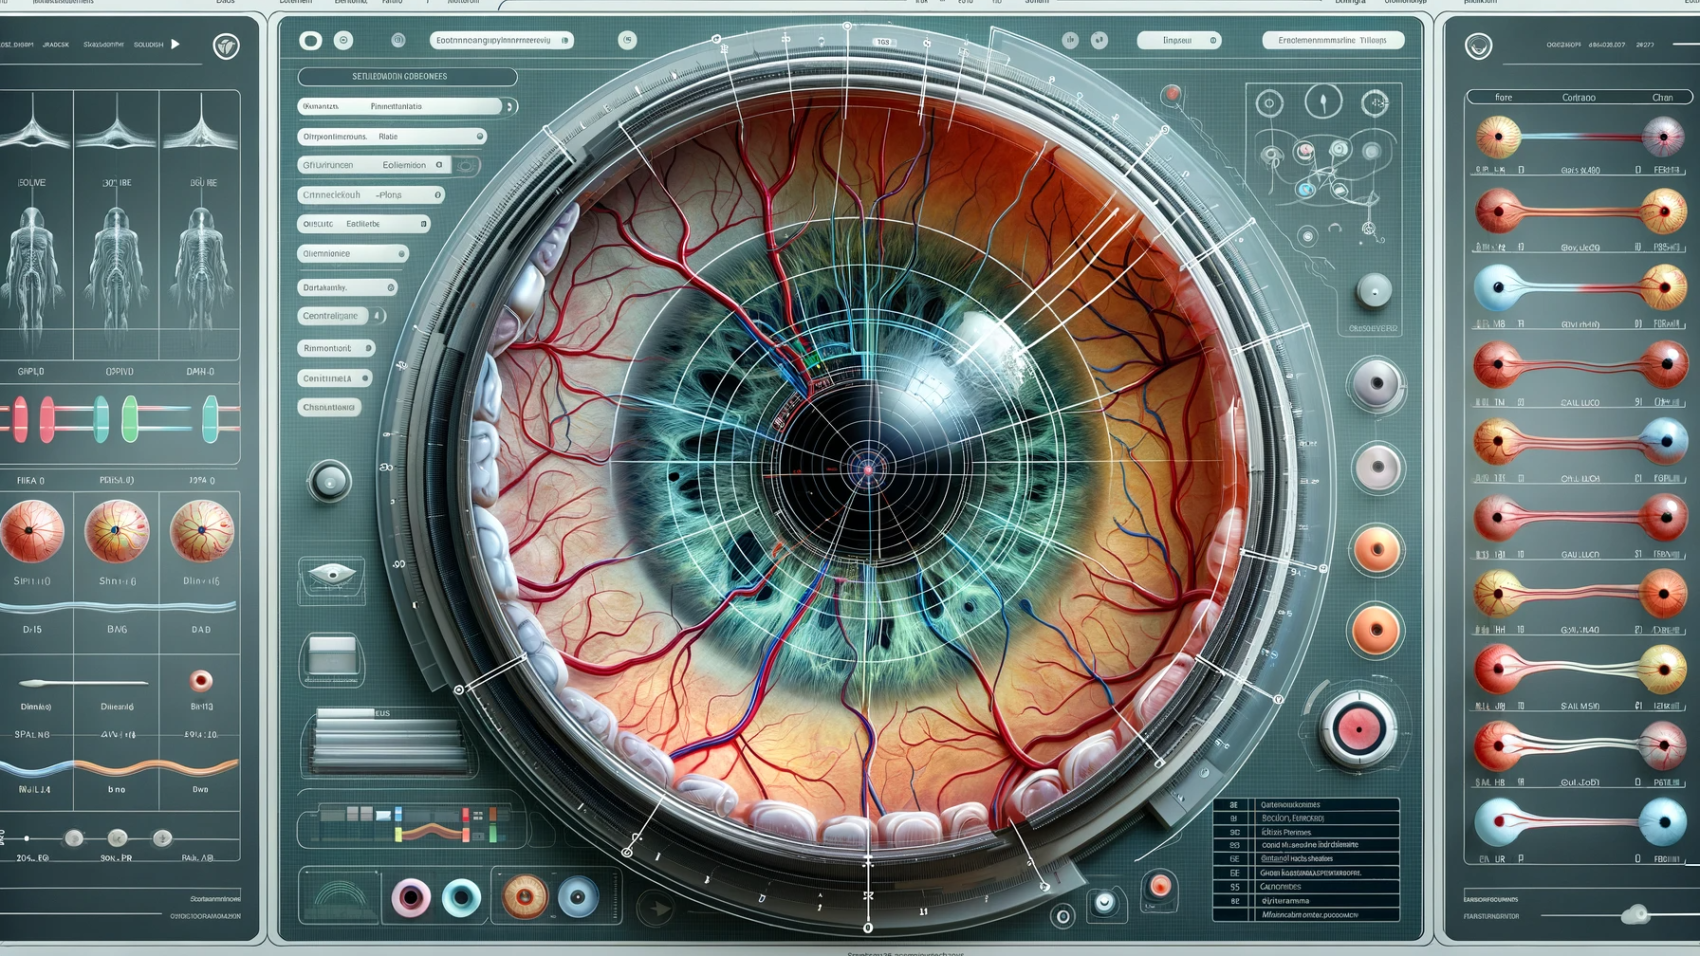 DALL·E 2023-11-10 16.58.48 - An illustration of a sophisticated medical software interface analyzing a retinal image. The interface should display a detailed retinal scan with var